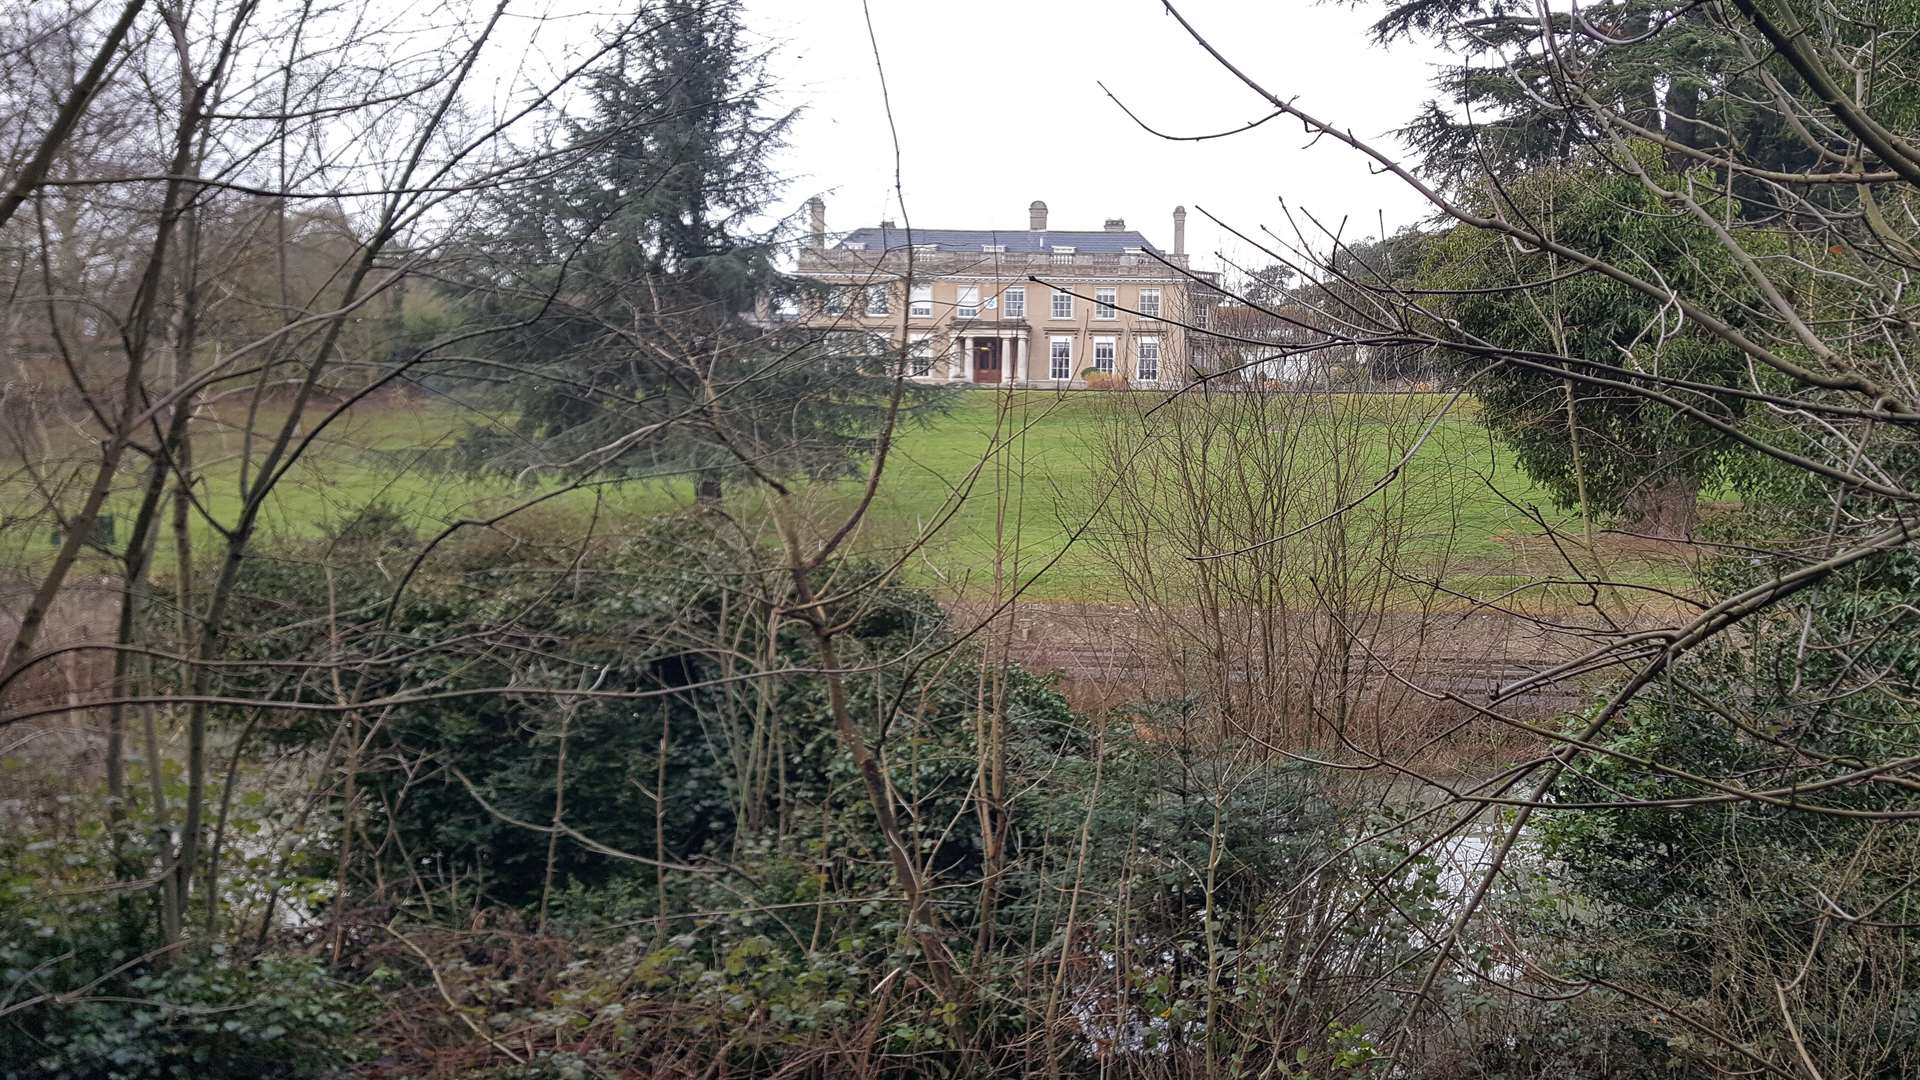 Douces Manor overlooks the park